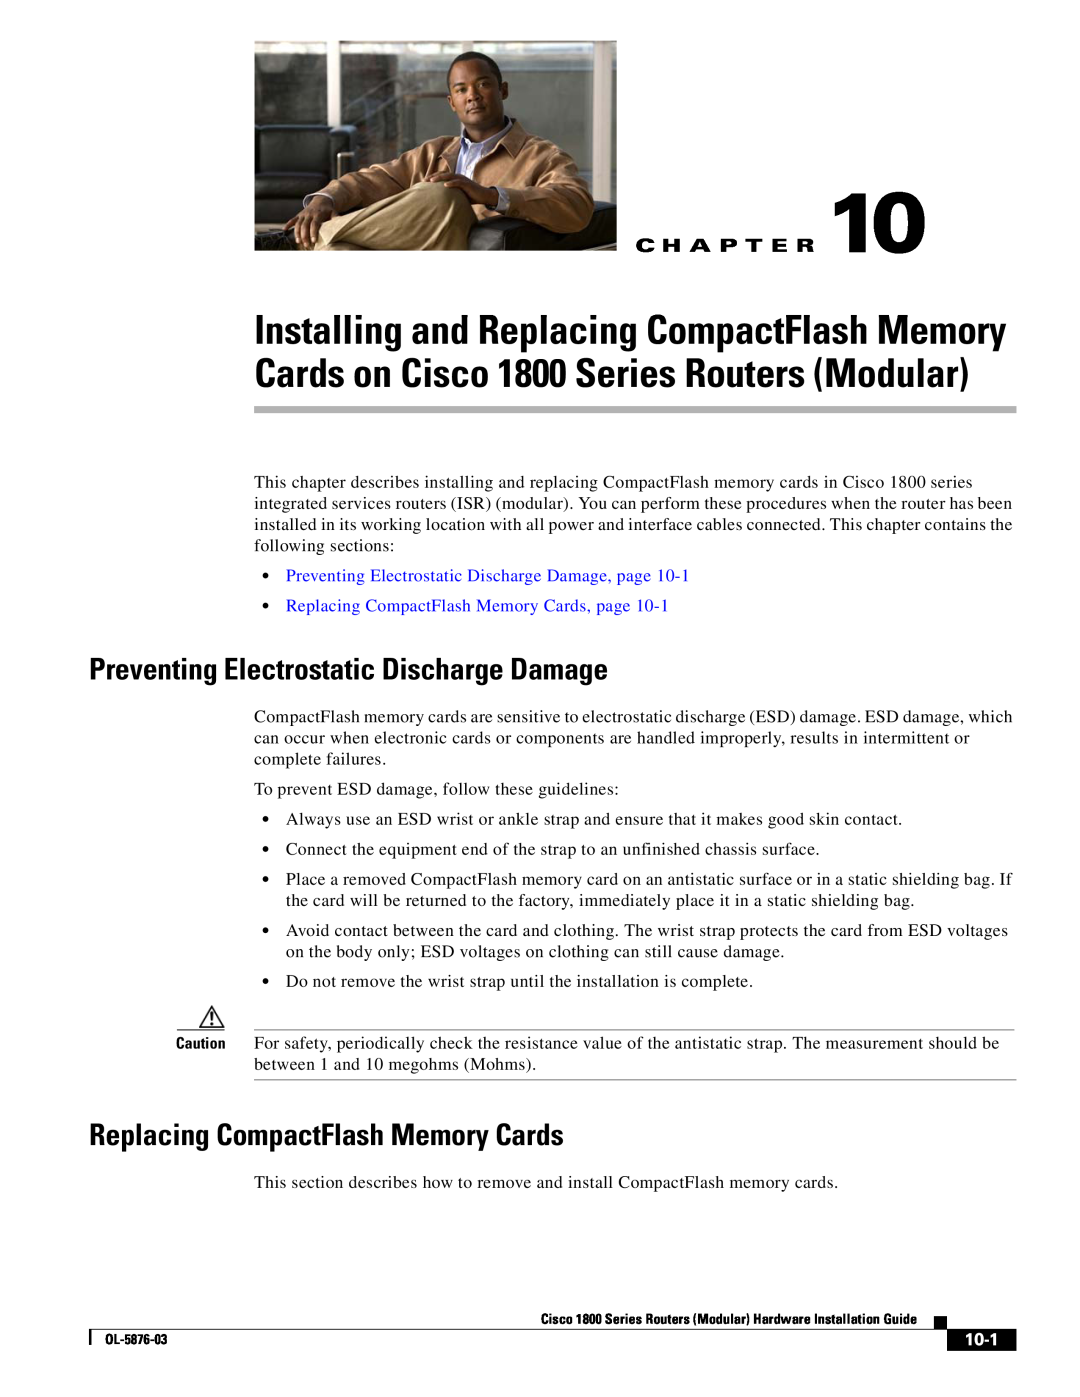 Cisco Systems CISCO1841-HSEC/K9-RF Replacing CompactFlash Memory Cards, Preventing Electrostatic Discharge Damage, page 